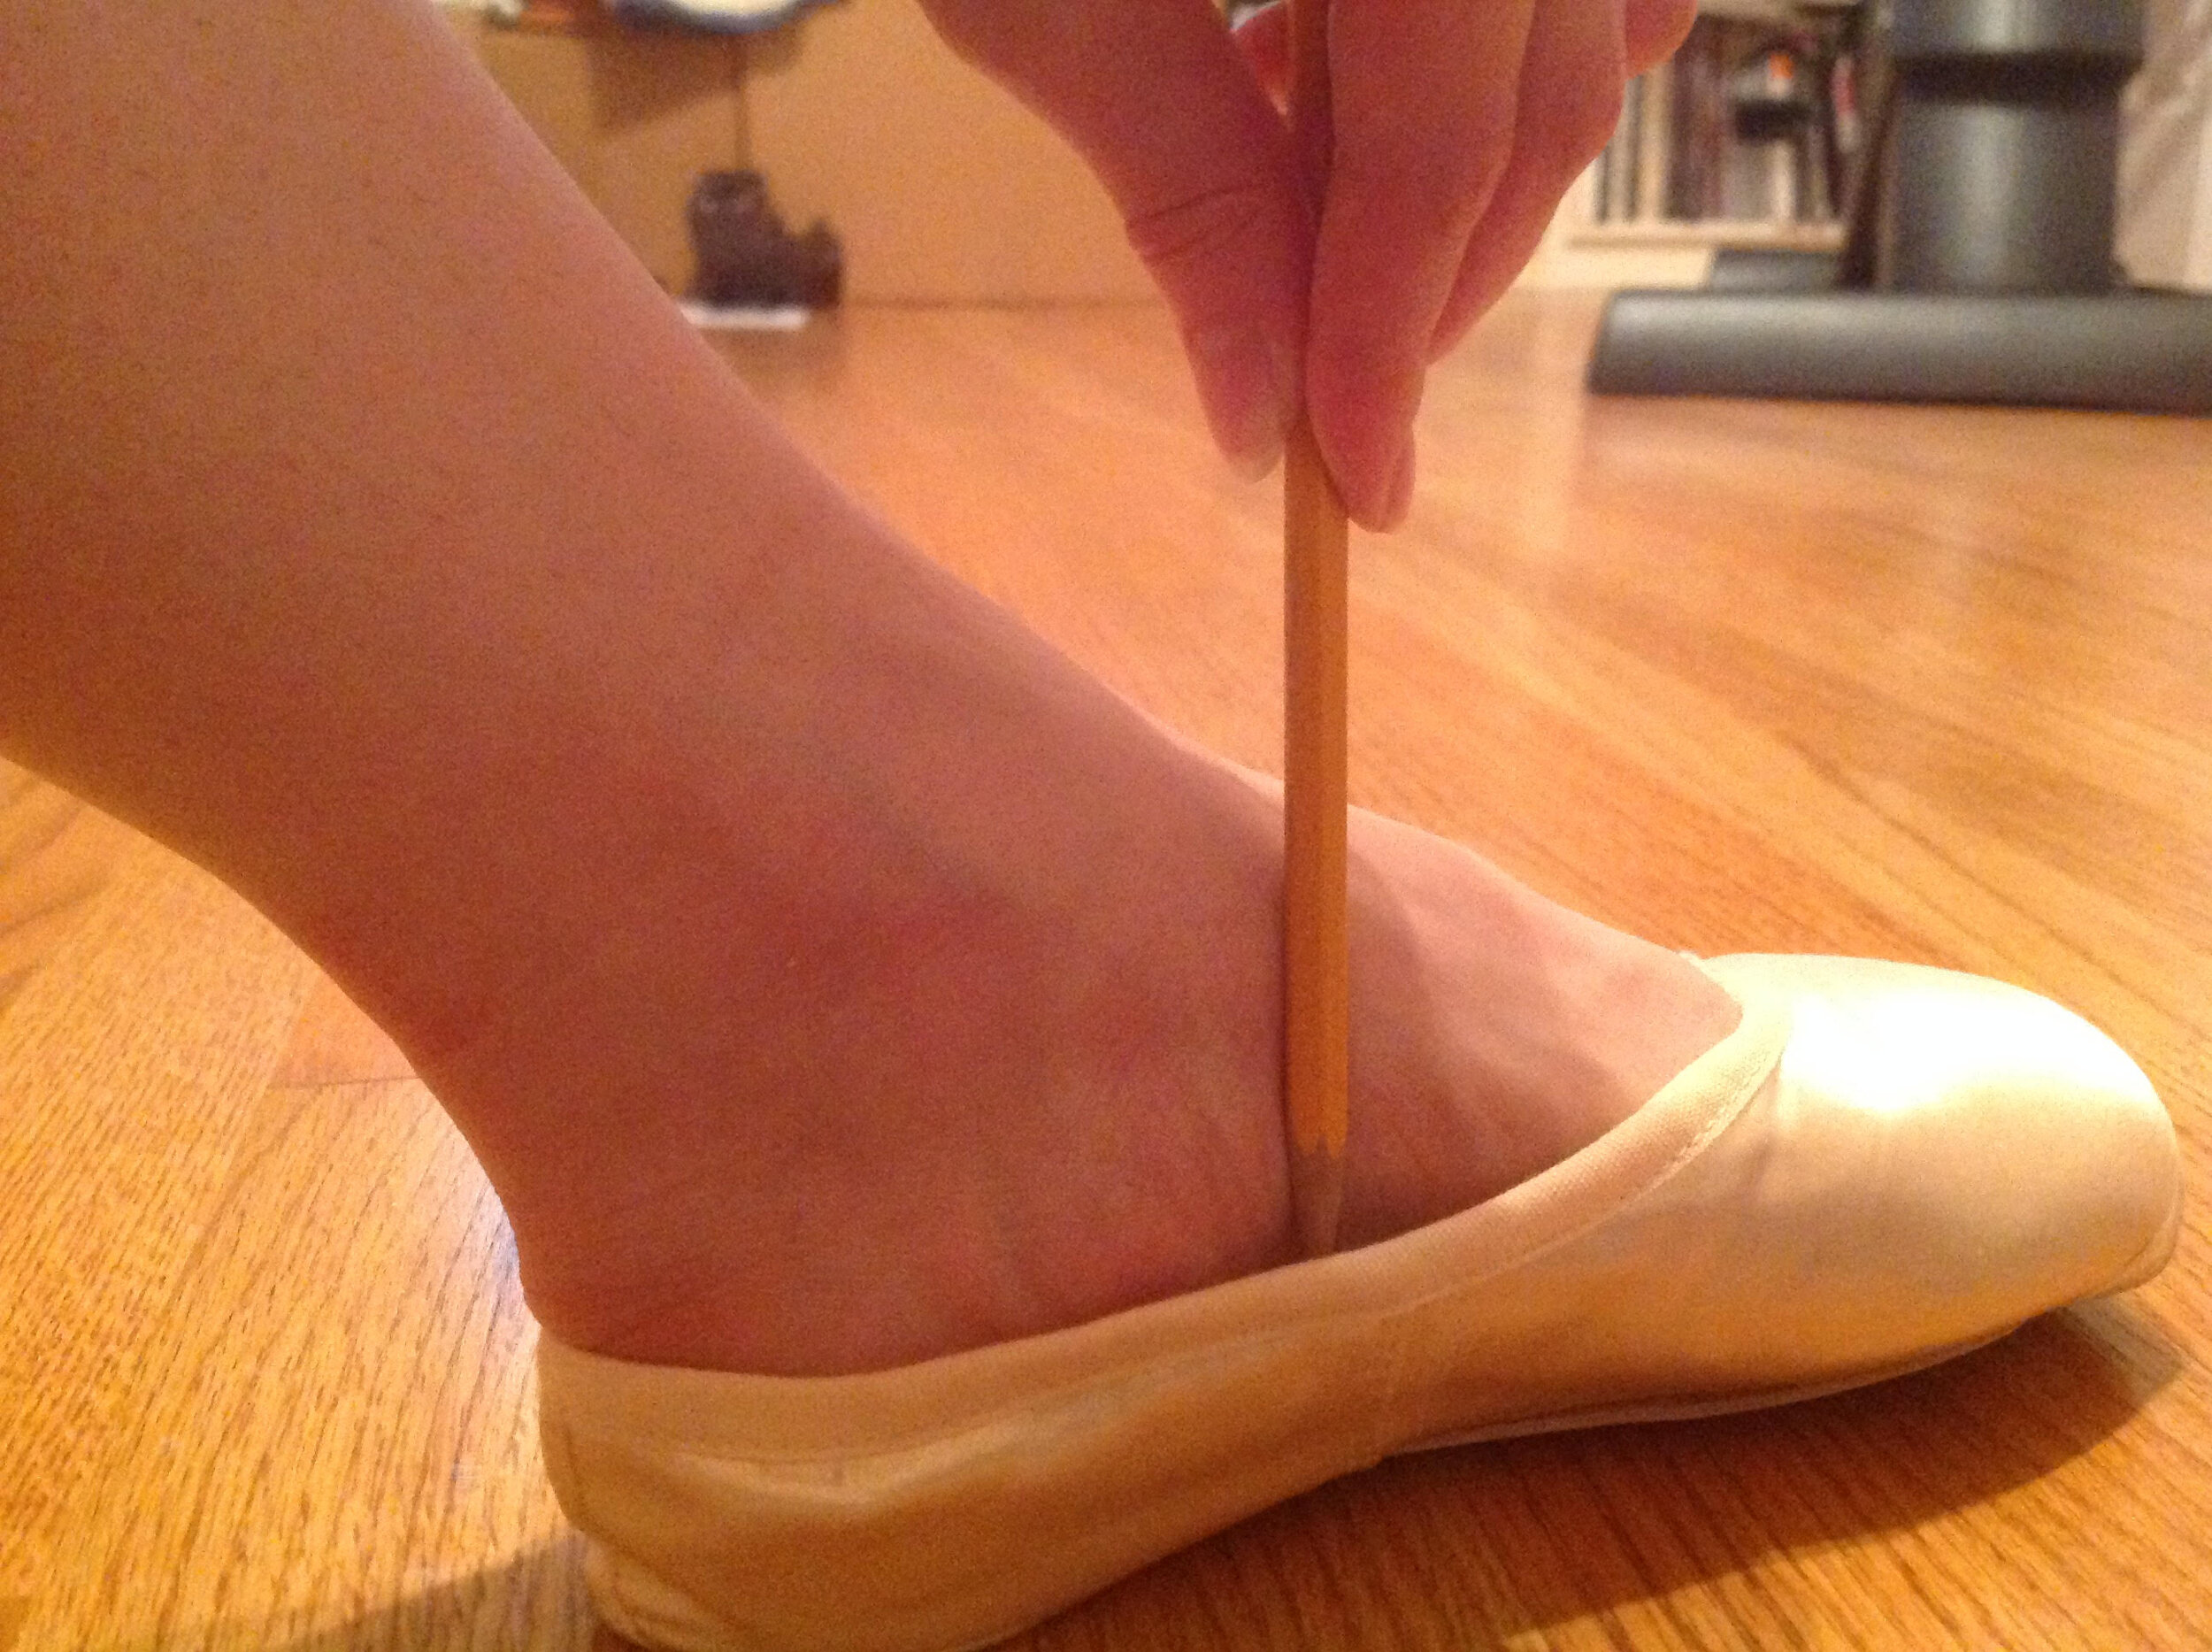 How to sew Pointe Shoes 